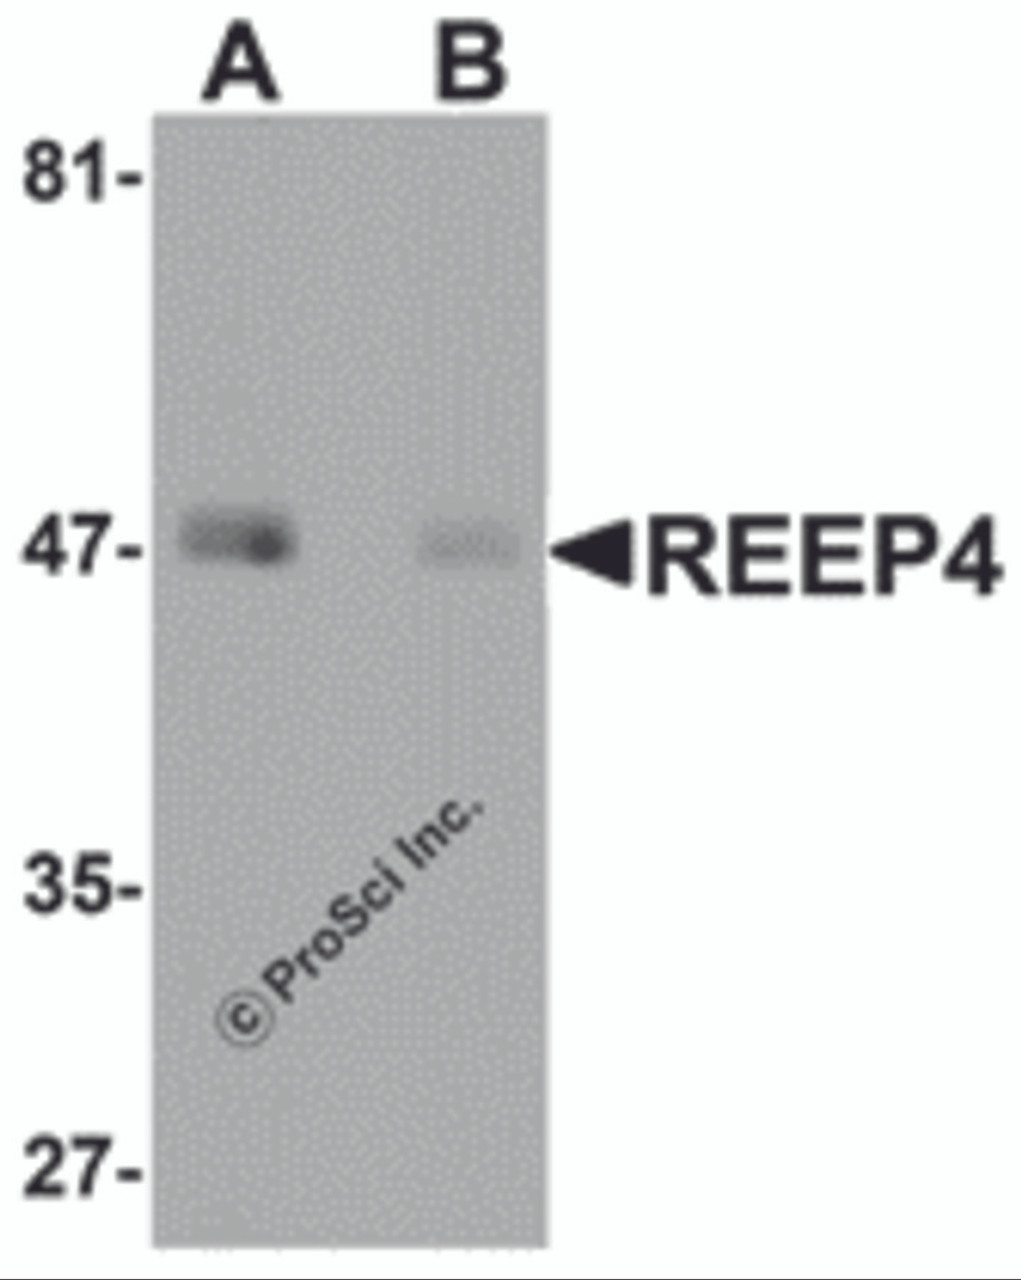 Western blot analysis of REEP4 in human lung tissue lysate with REEP4 antibody at 1 &#956;g/ml in (A) the absence and (B) the presence of blocking peptide.